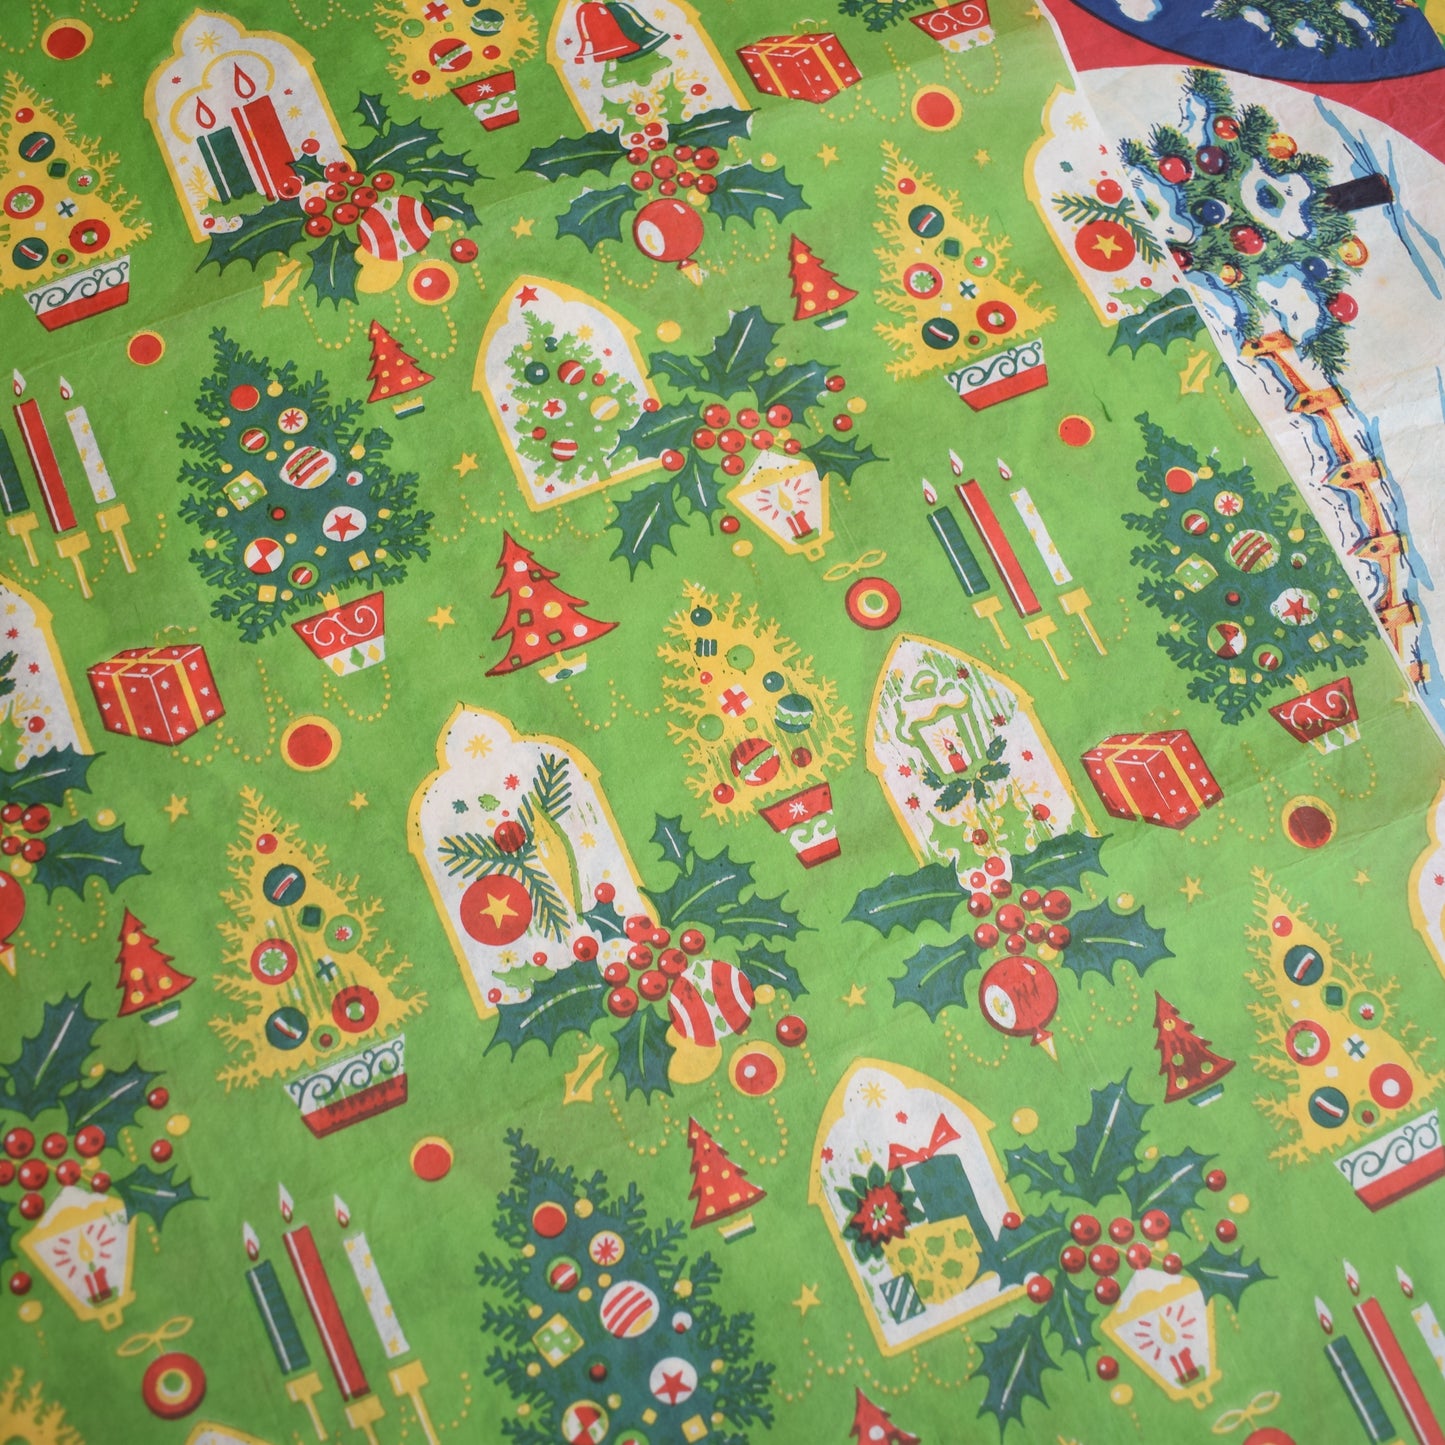 Vintage 1970s Christmas Gift Paper - Mixed Pack